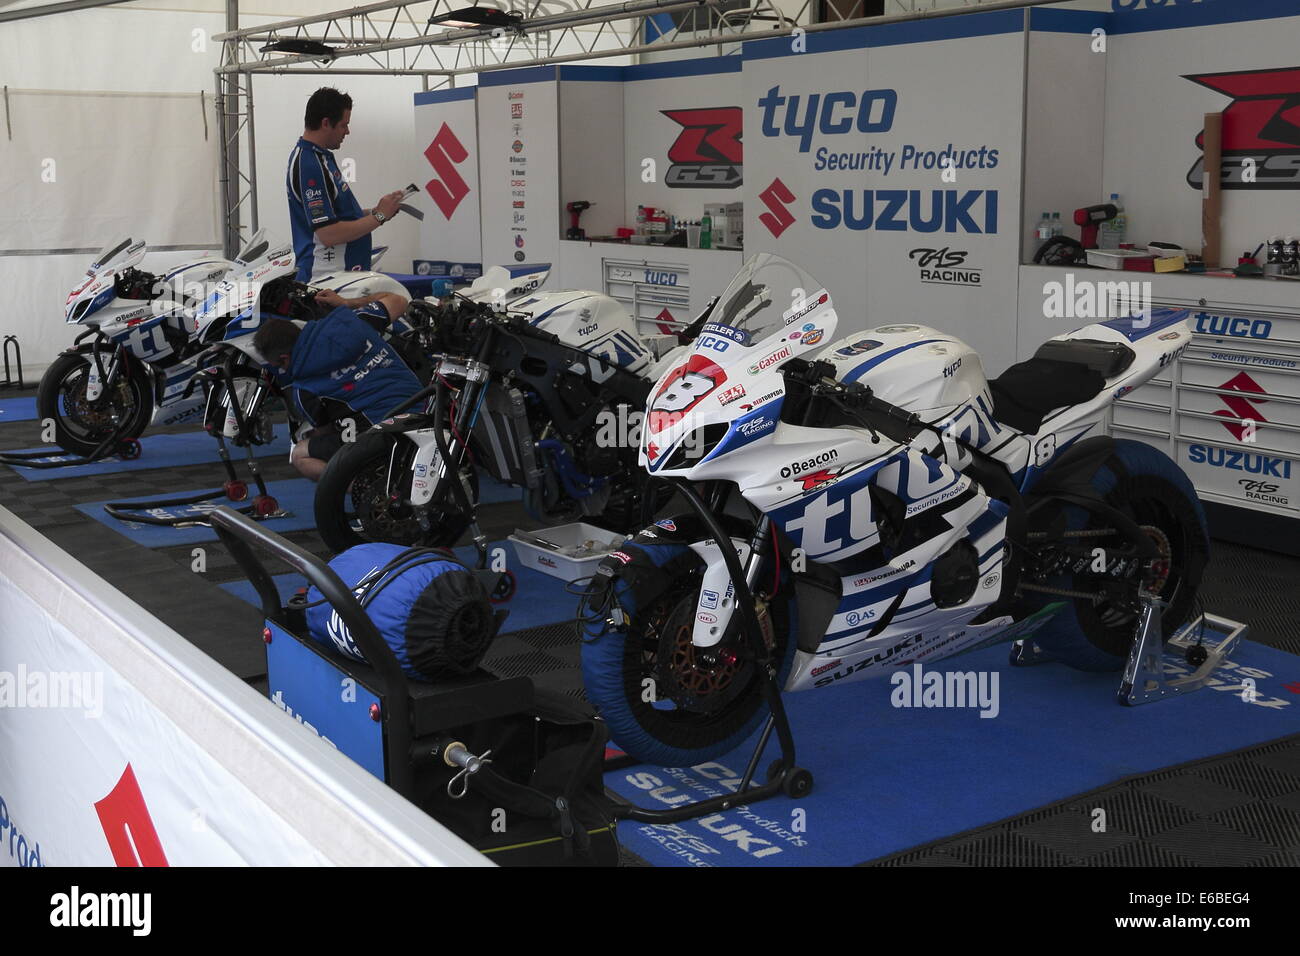 The Tyco Suzuki pit, with motorcycles for Guy Martin and William Dunlop, during the 2014 Isle of Man TT. Stock Photo